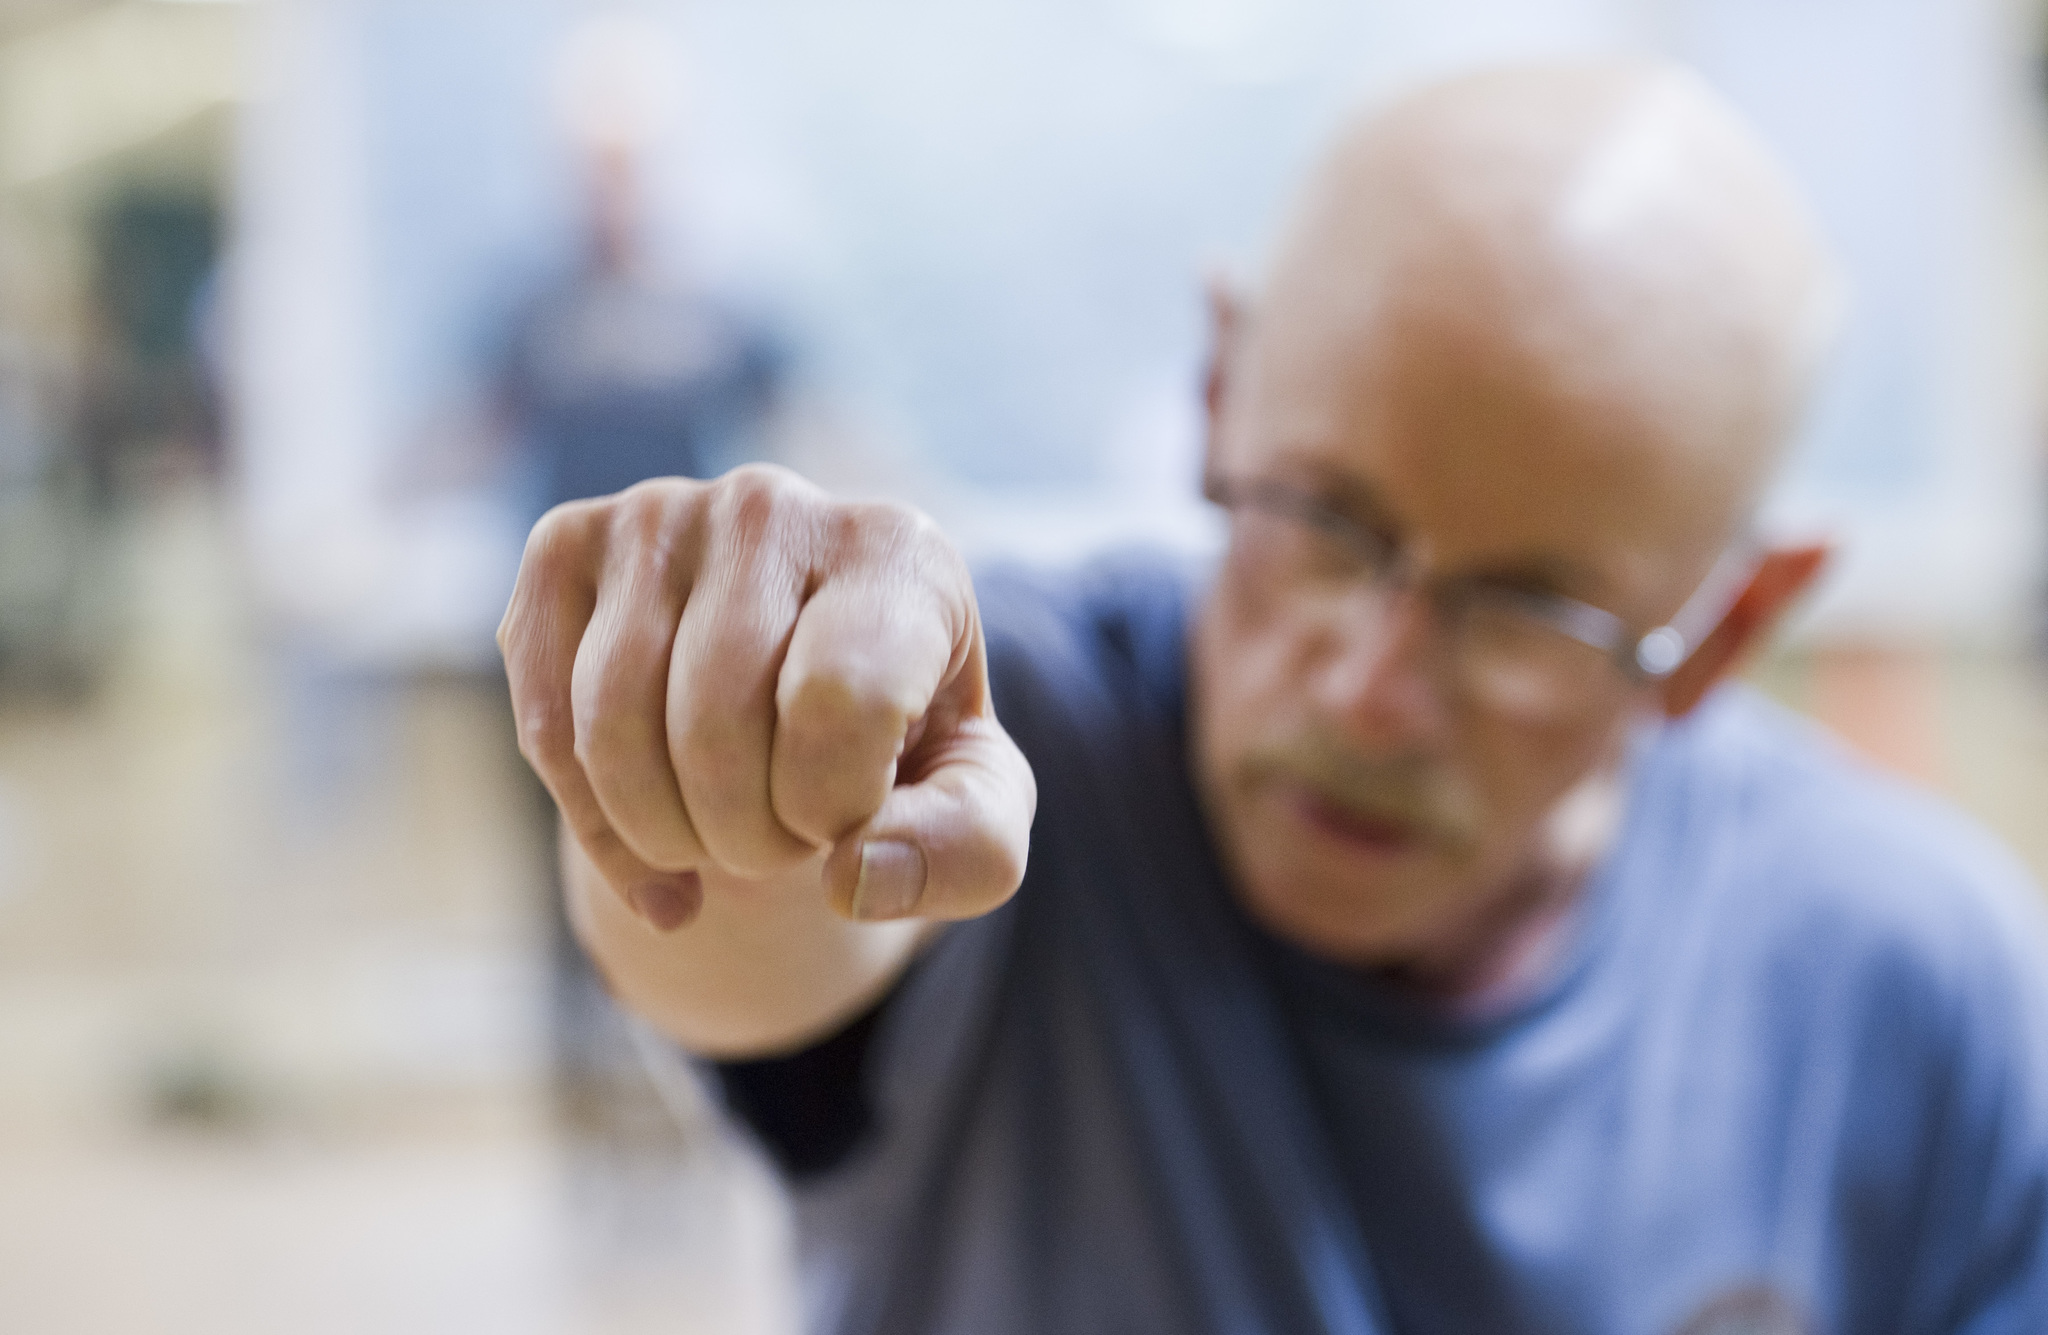 Tim Smith shadow boxes during the Rock Steady Boxing class at Pavitt Health & Fitness on Thursday. The class is offered to those with various stages of Parkinson’s disease. (Michael Penn | Juneau Empire)